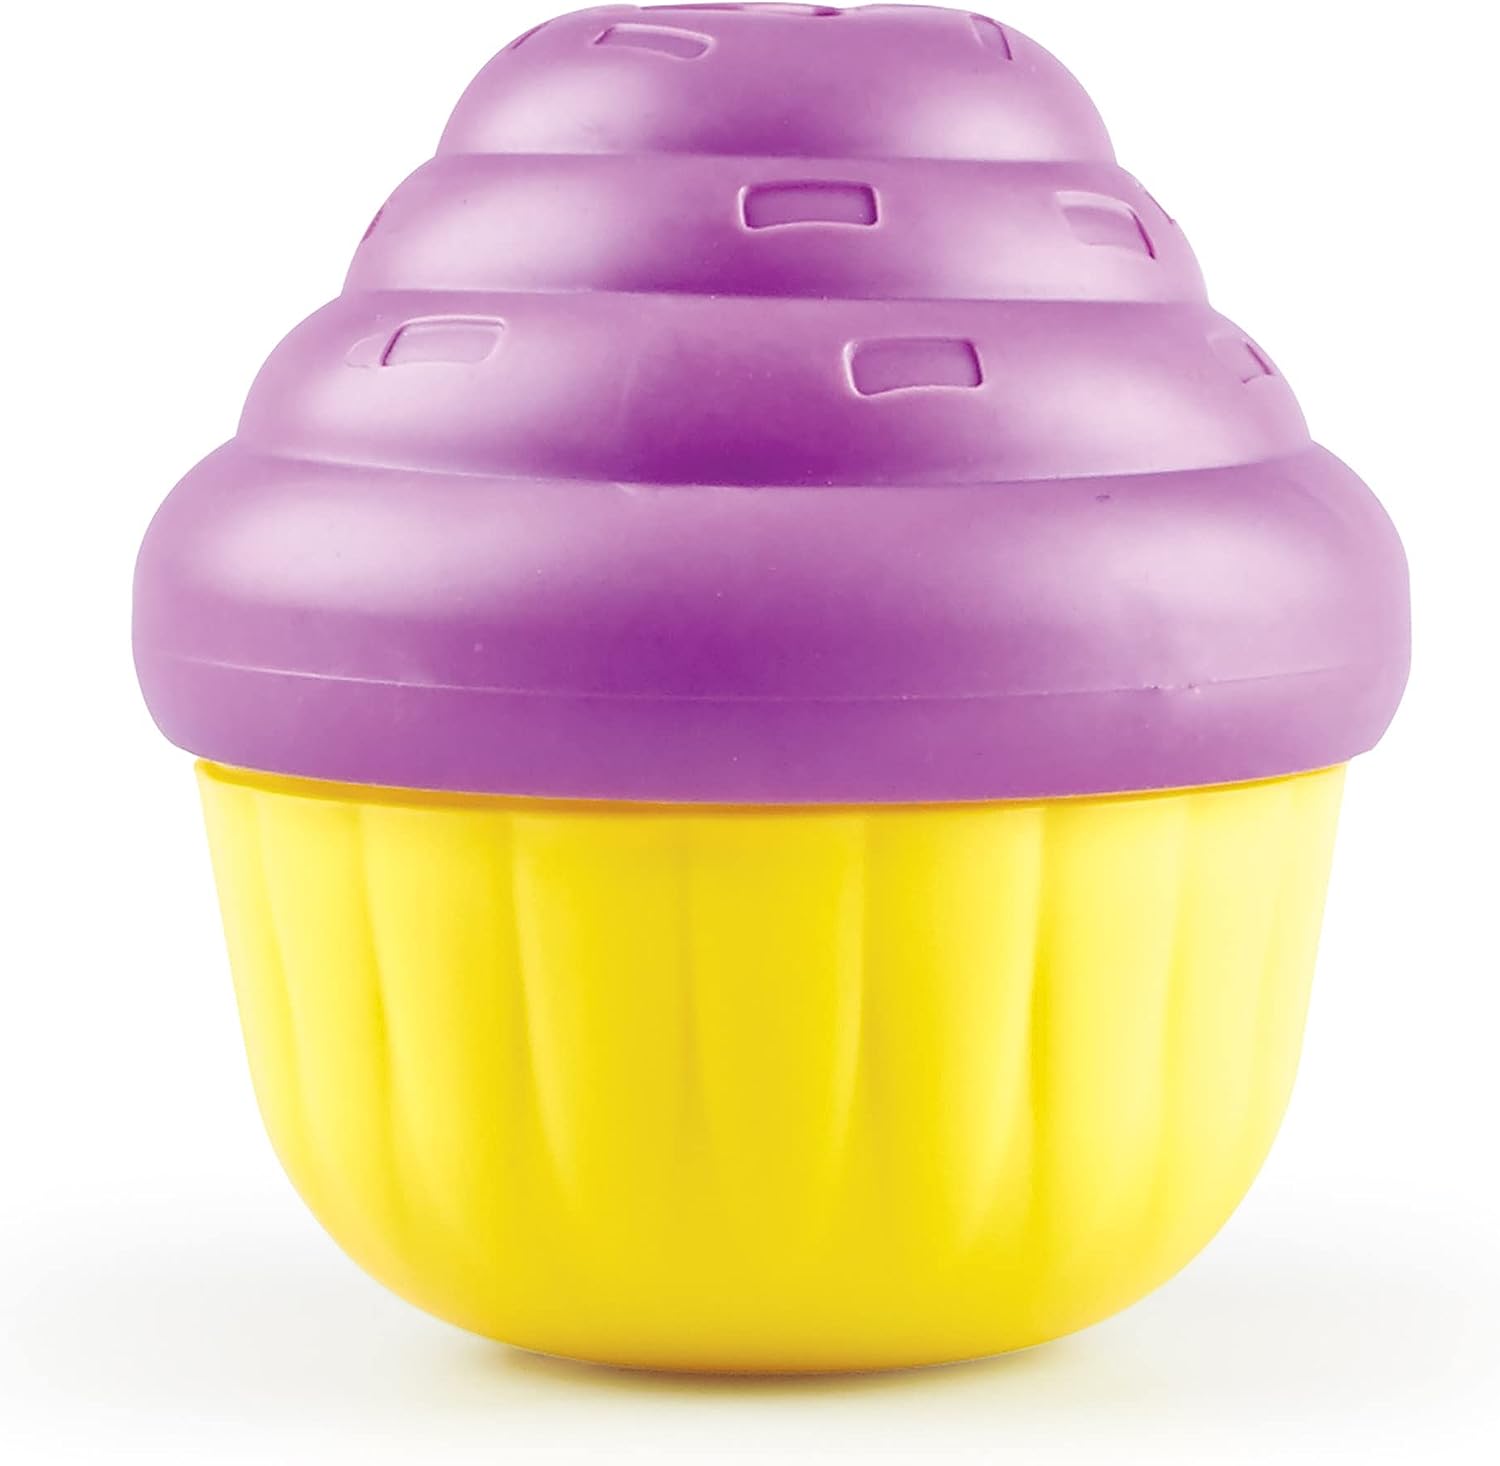 Small Cupcake Treat Dispenser for Dogs - by Brightkins